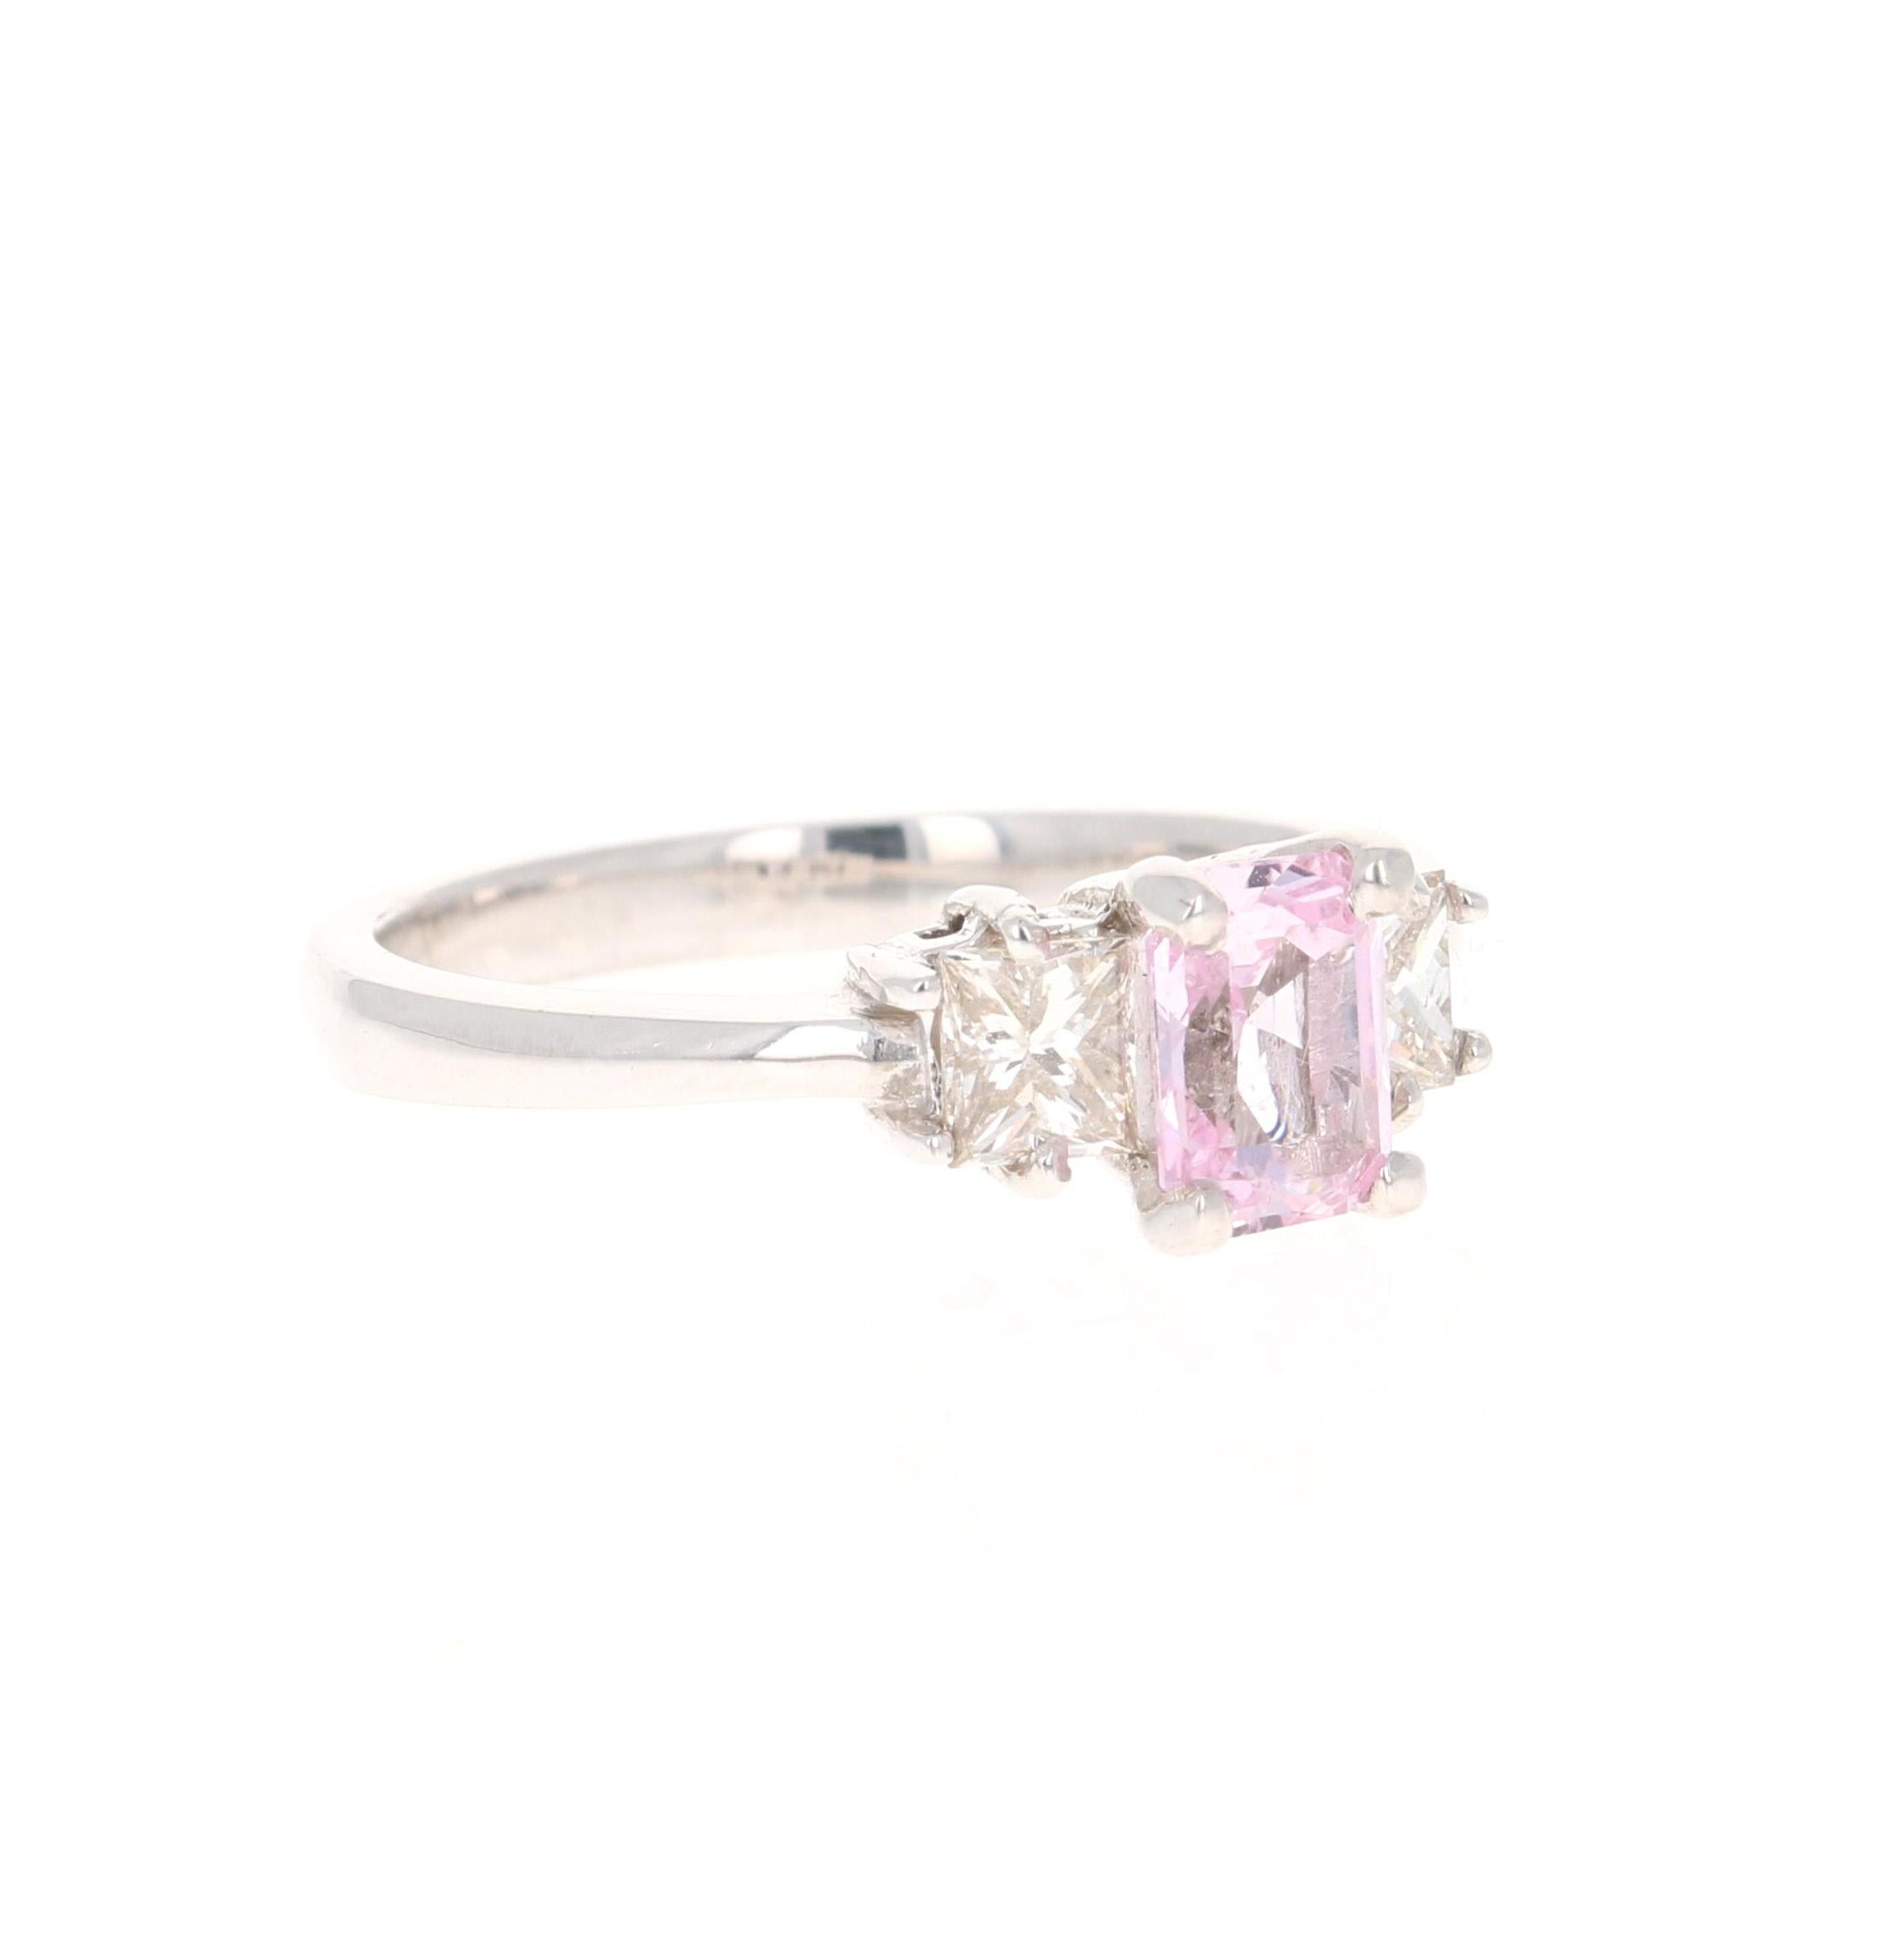 This beautiful ring has a Emerald Cushion Cut Pink Sapphire that weighs 1.01 Carat. The Pink Sapphire has a beautiful light pink color that is rare and valued The stone is Heated as per industry standards. The measurements of the sapphire are